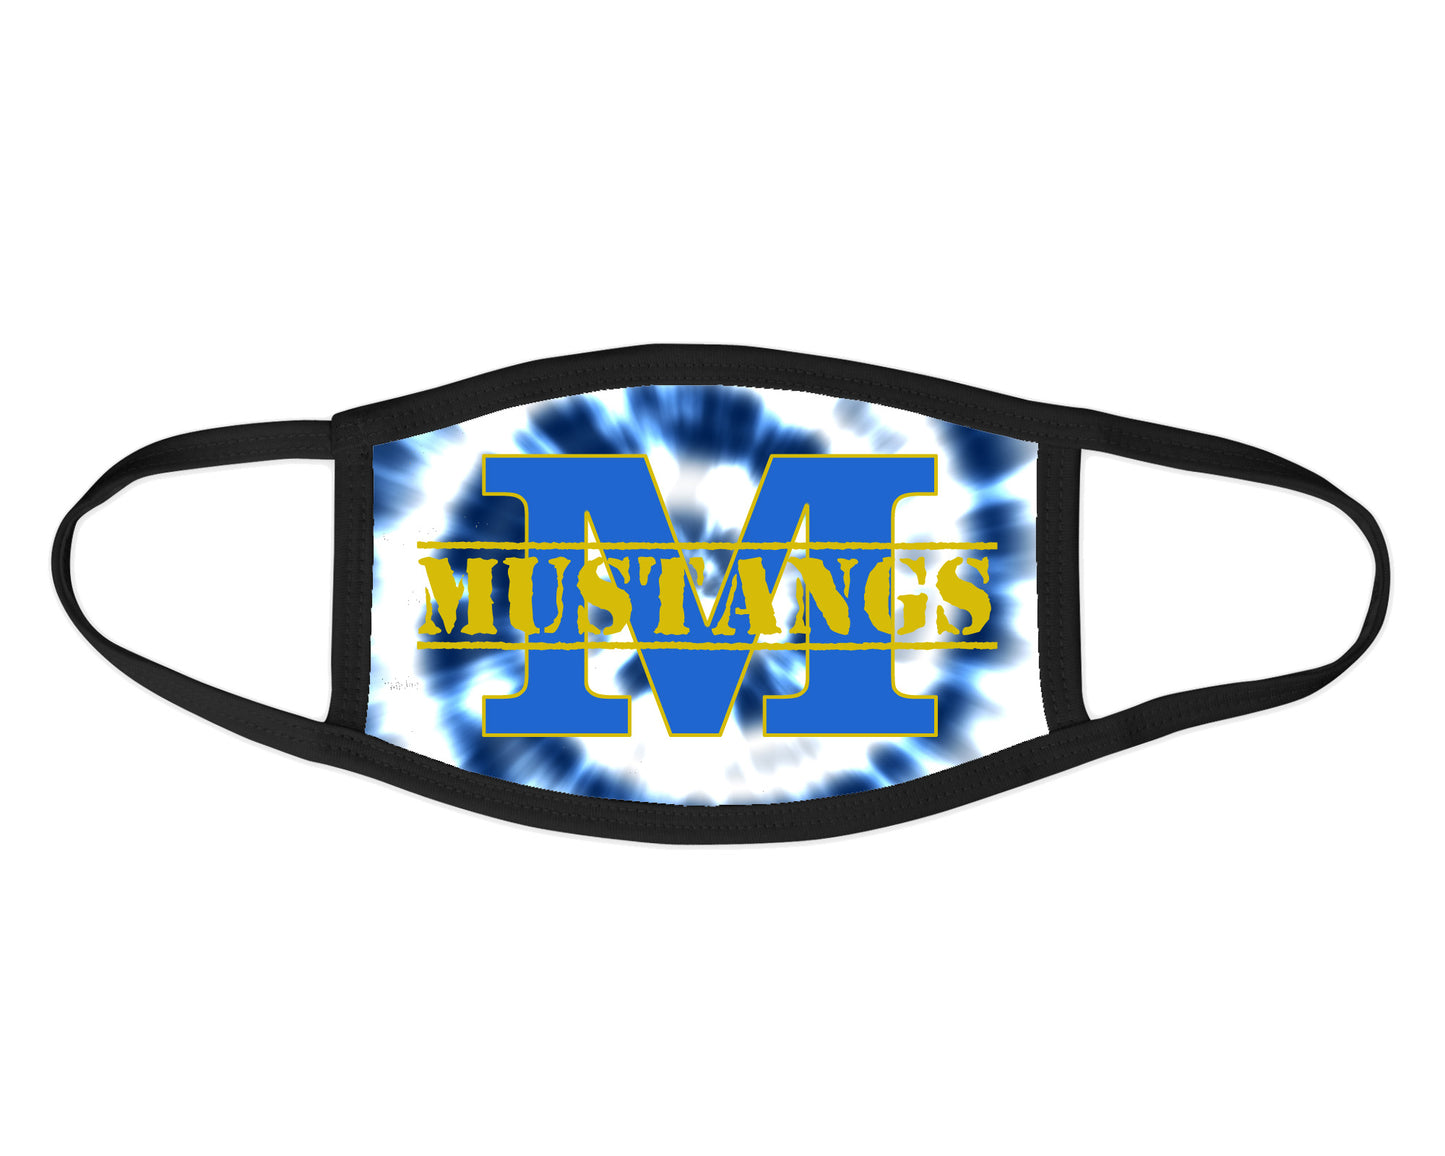 New Haven Mustangs Face Mask